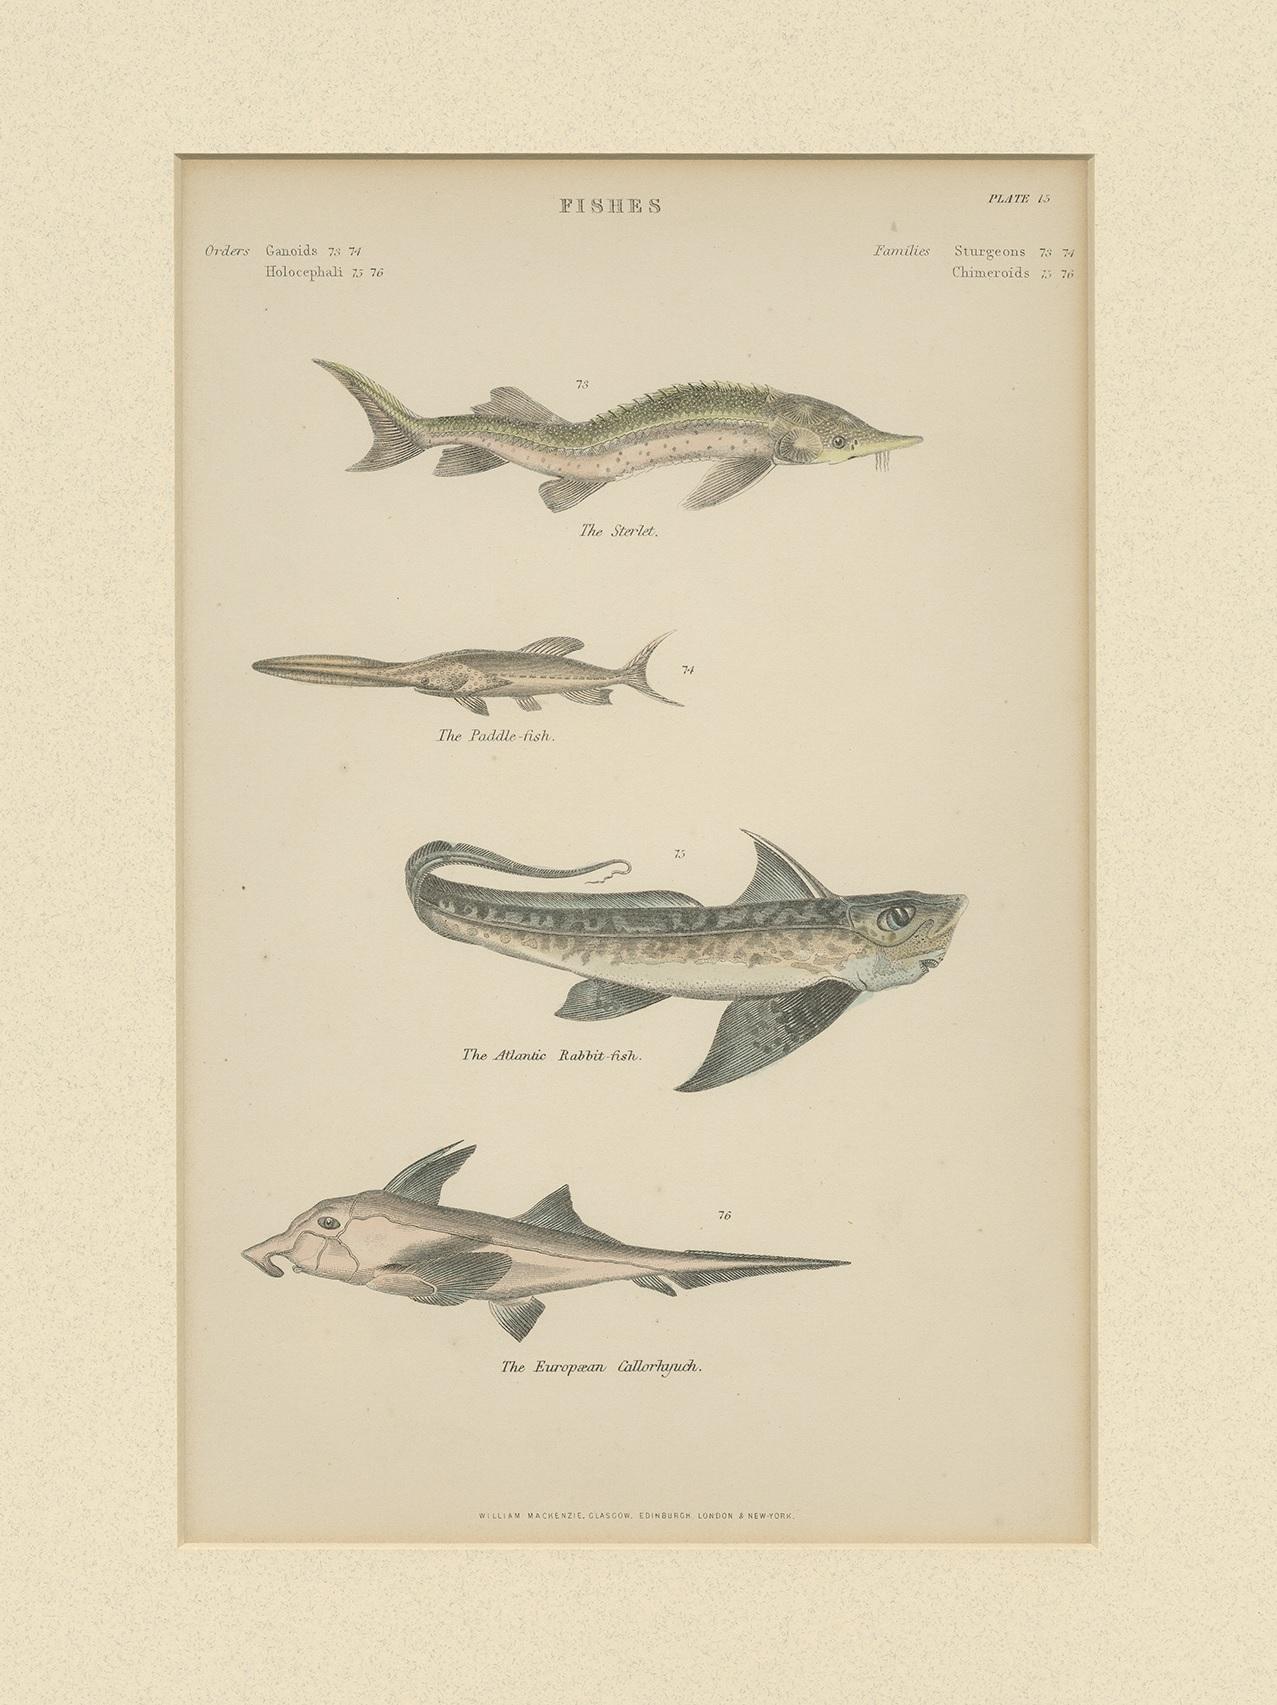 Antique print titled 'Fishes'. Print of various fishes including the sterlet, paddlefish, rabbitfish and European callorhyuch. This print originates from 'The Museum of Natural History' by John Richardson. Published by William